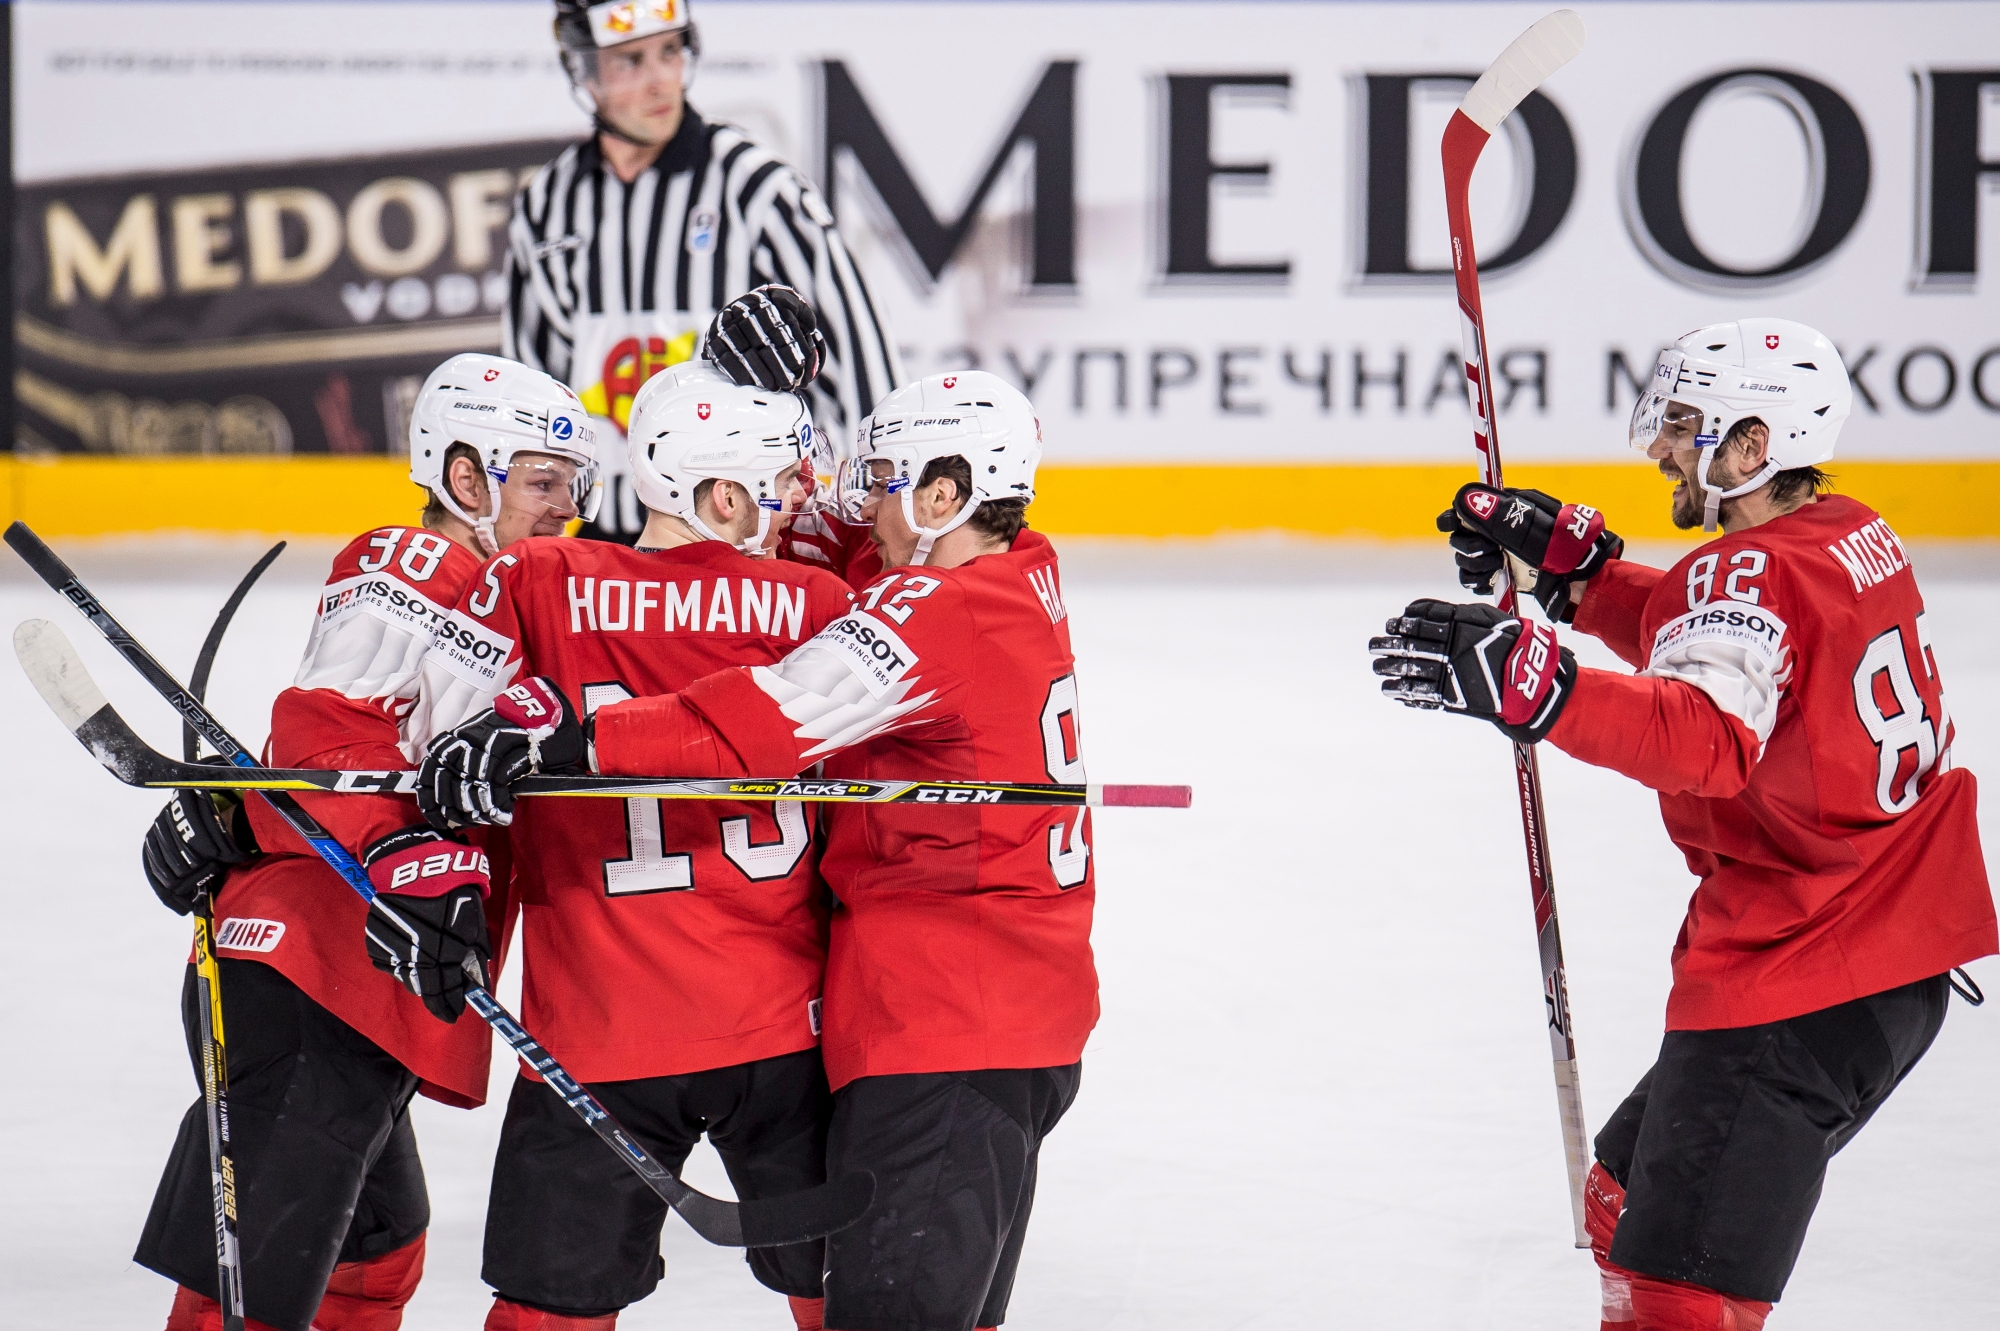 epa06738227 Players of Switzerland celebrates after a scoring a goal during the IIHF World Championship group A ice hockey match between Switzerland and France at the Royal Arena in Copenhagen, Denmark, 15 May 2018.  EPA/MADS CLAUS RASMUSSEN  DENMARK OUT DENMARK ICE HOCKEY WORLD CHAMPIONSHIP 2018